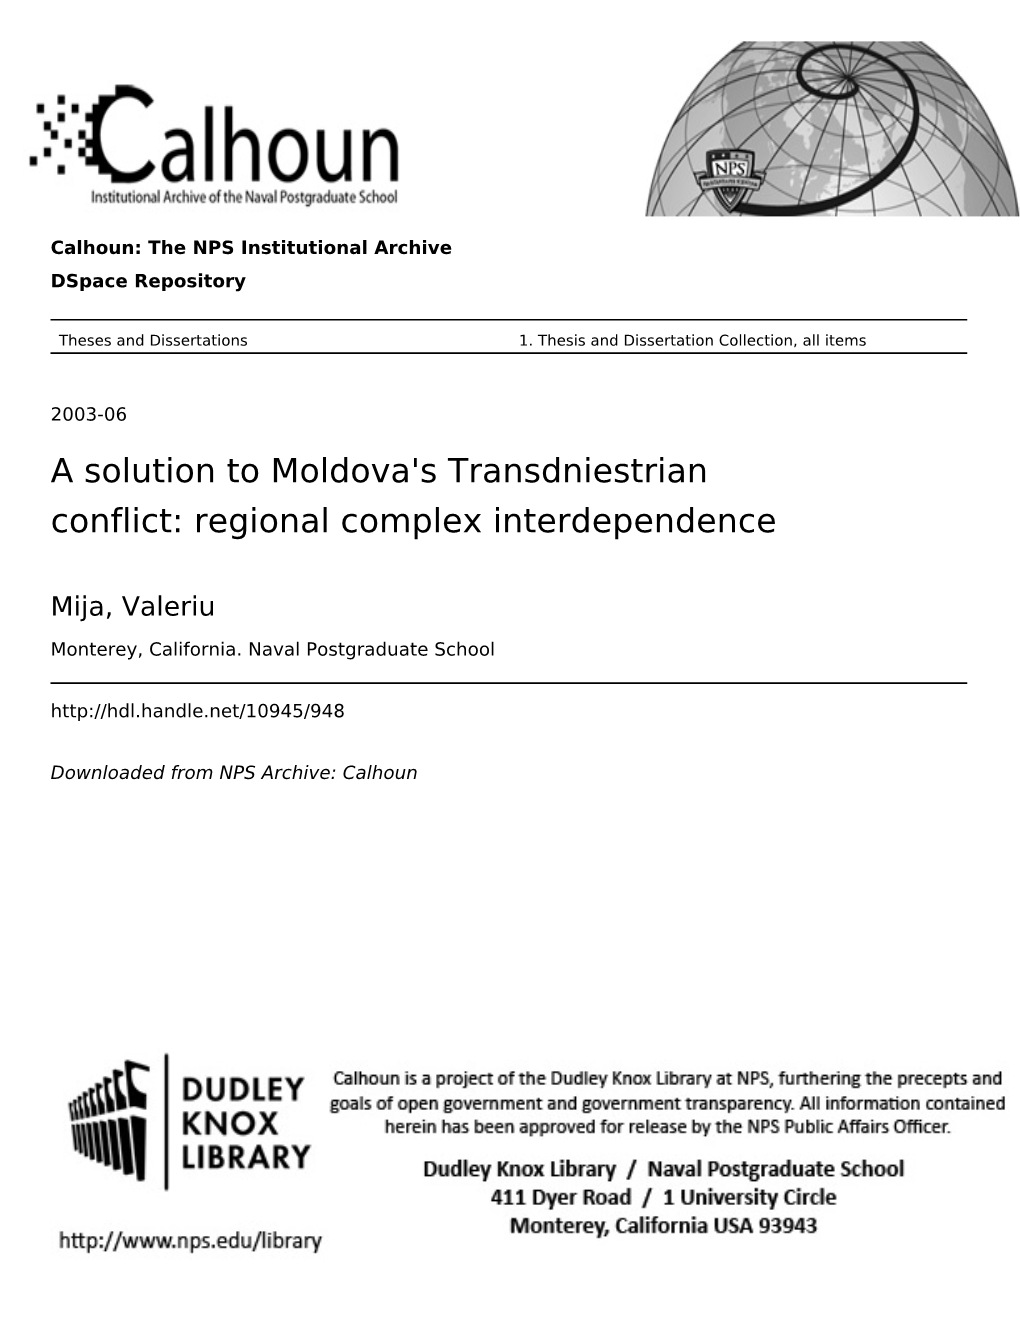 A Solution to Moldova's Transdniestrian Conflict: Regional Complex Interdependence